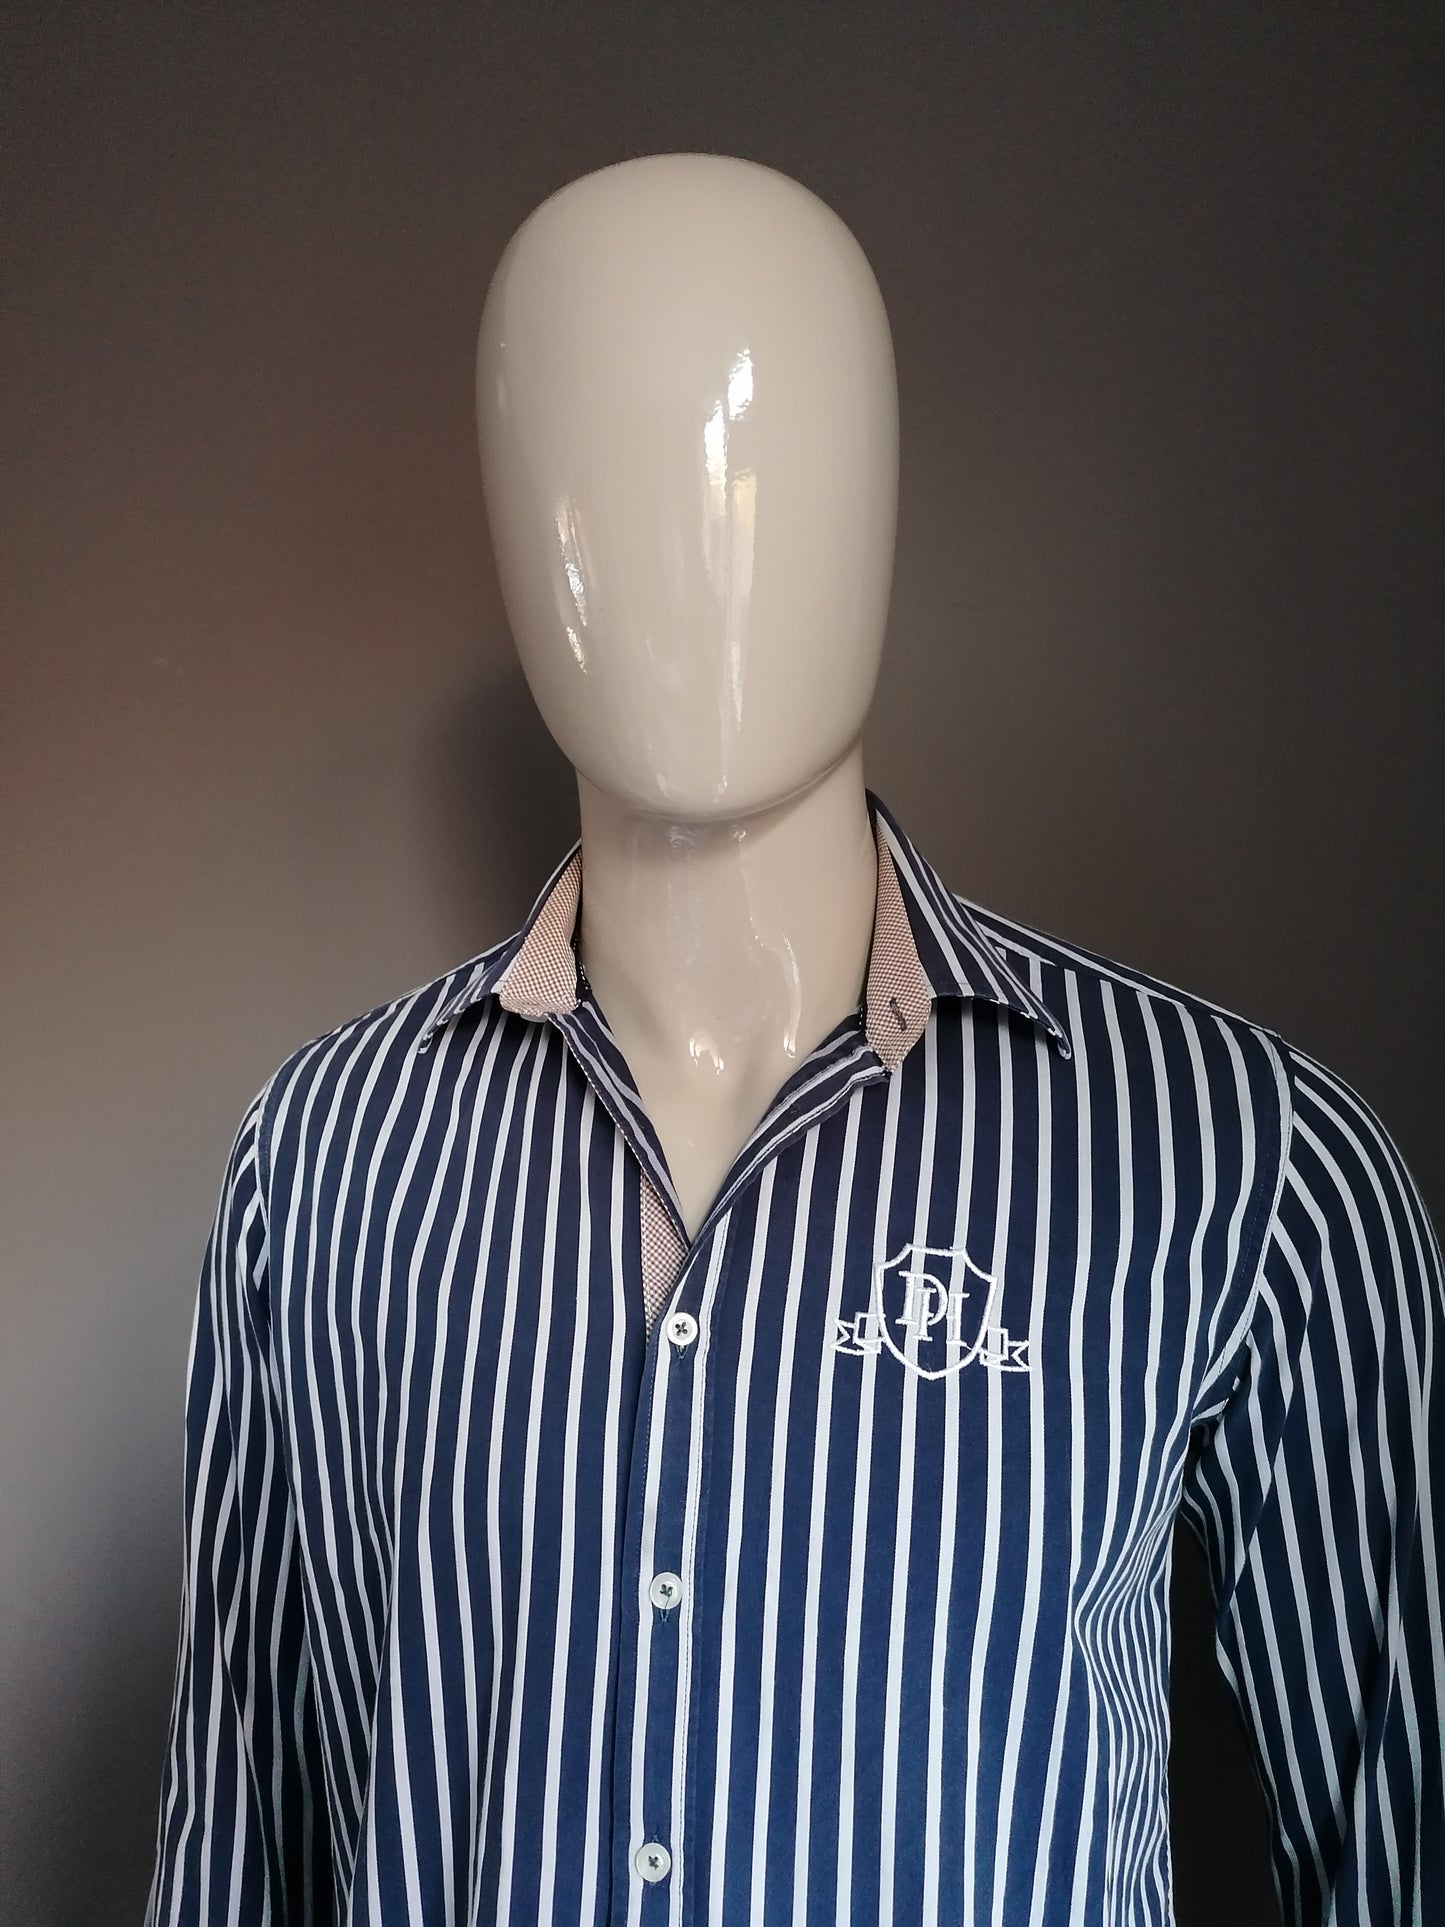 Holthaus shirt blue white striped. Size M.